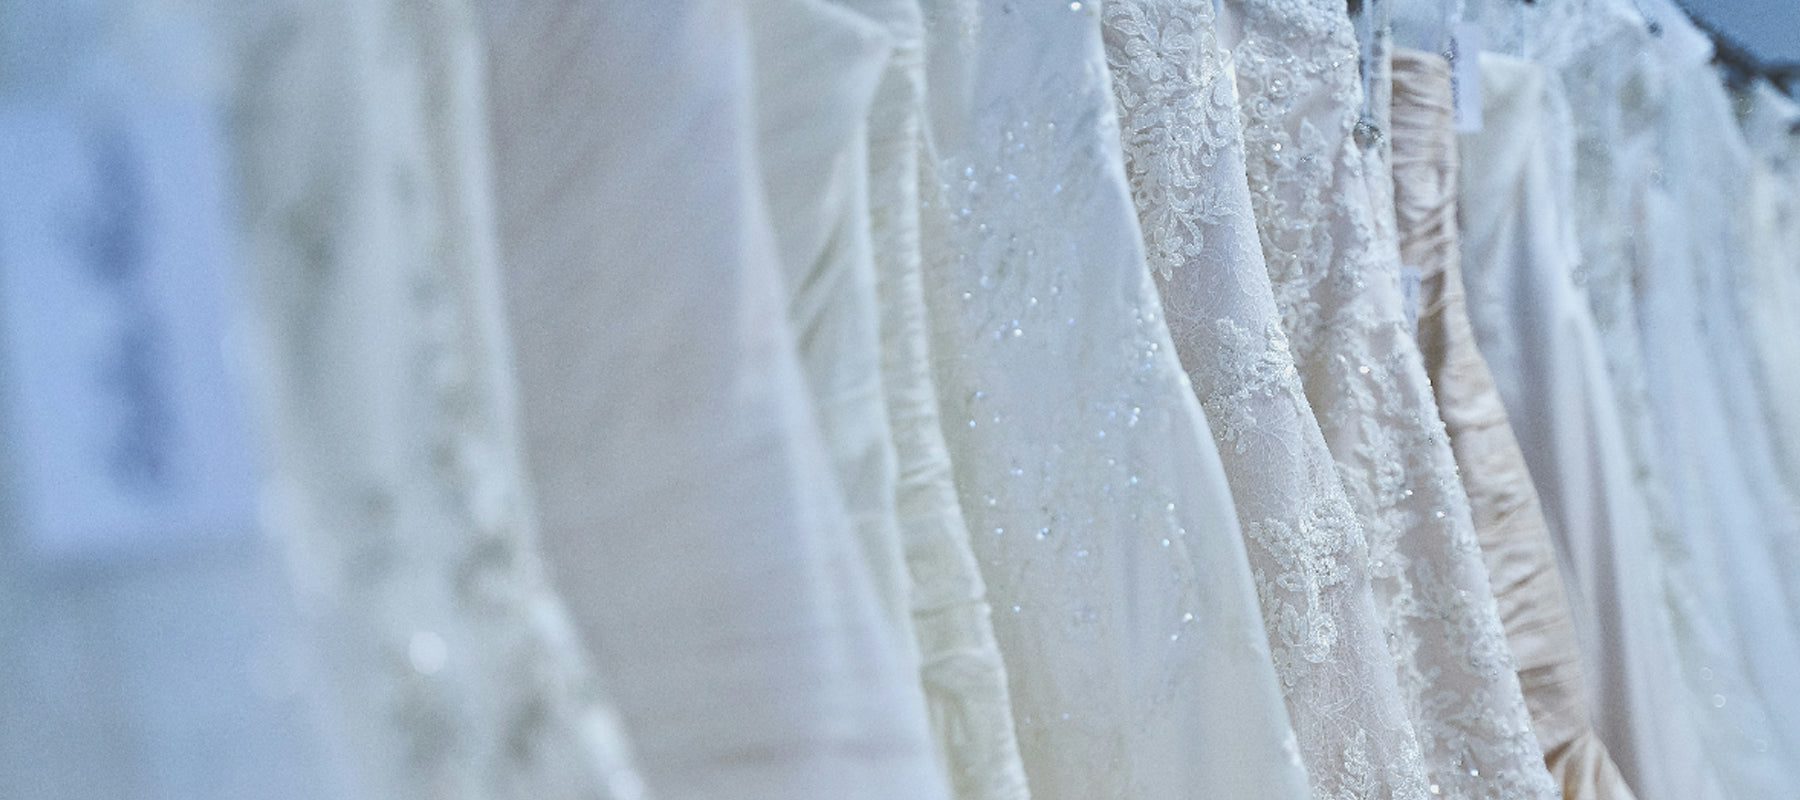 Finding The One: A Guide to Choosing Your Dream Wedding Dress